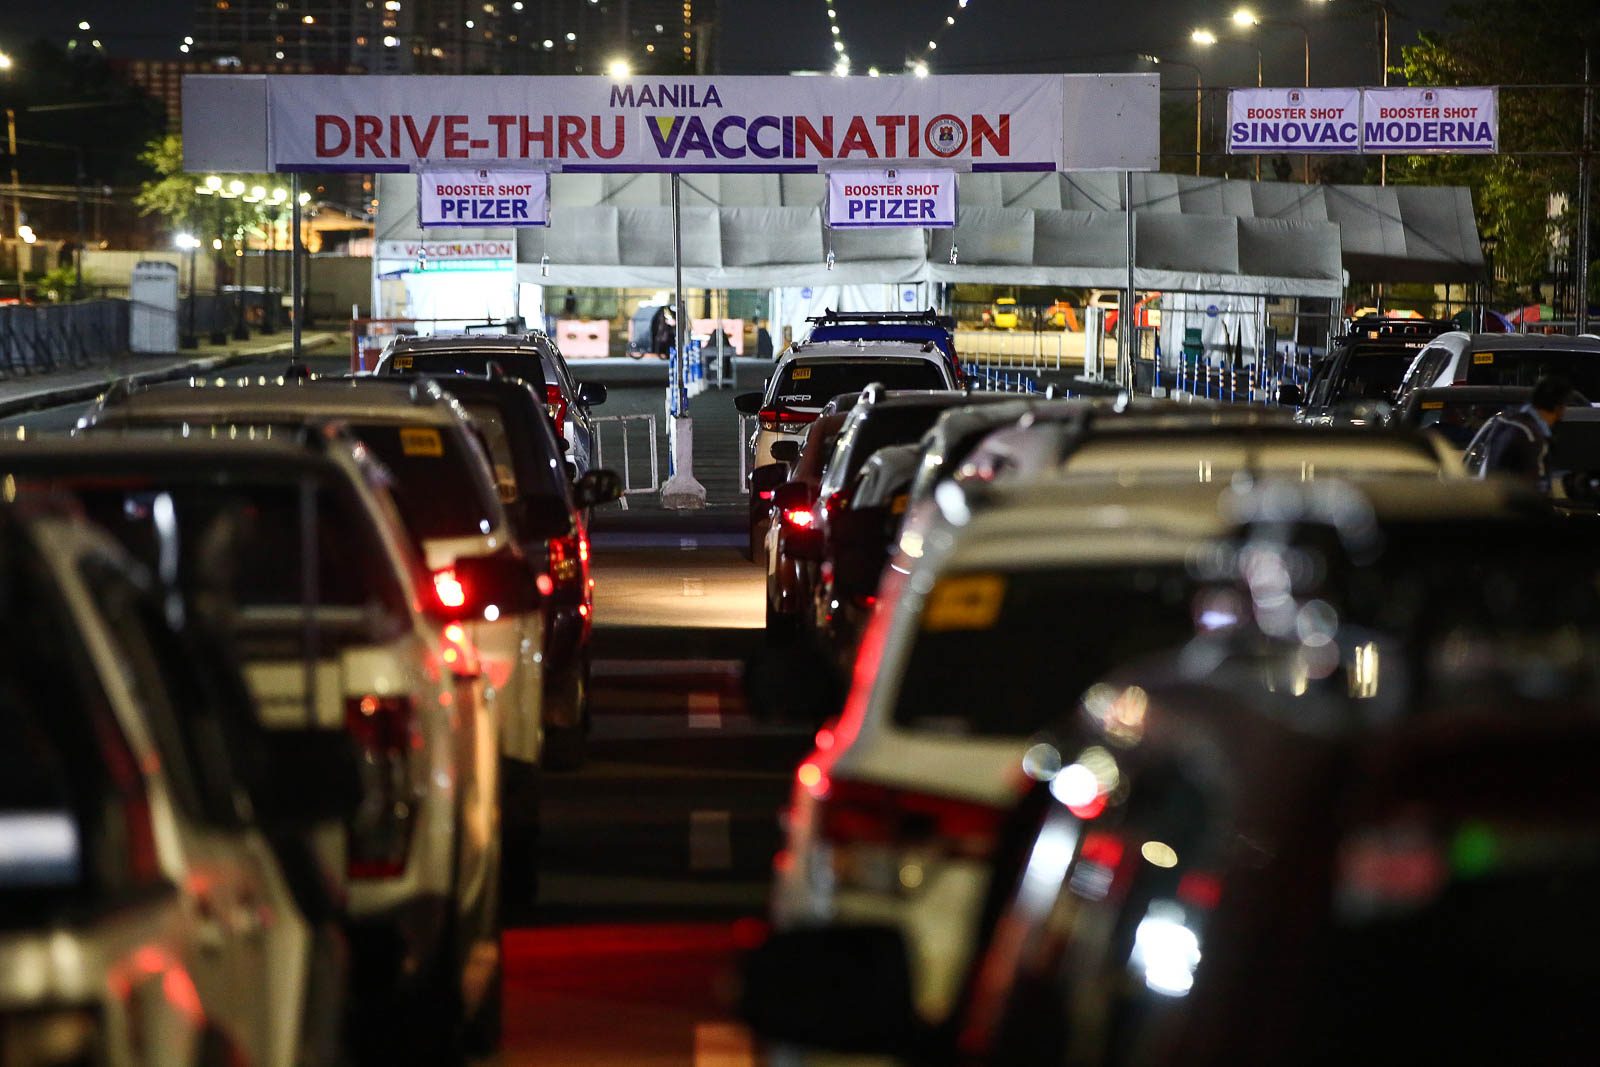 Philippines’ daily COVID-19 cases hit all-time high at 34,021